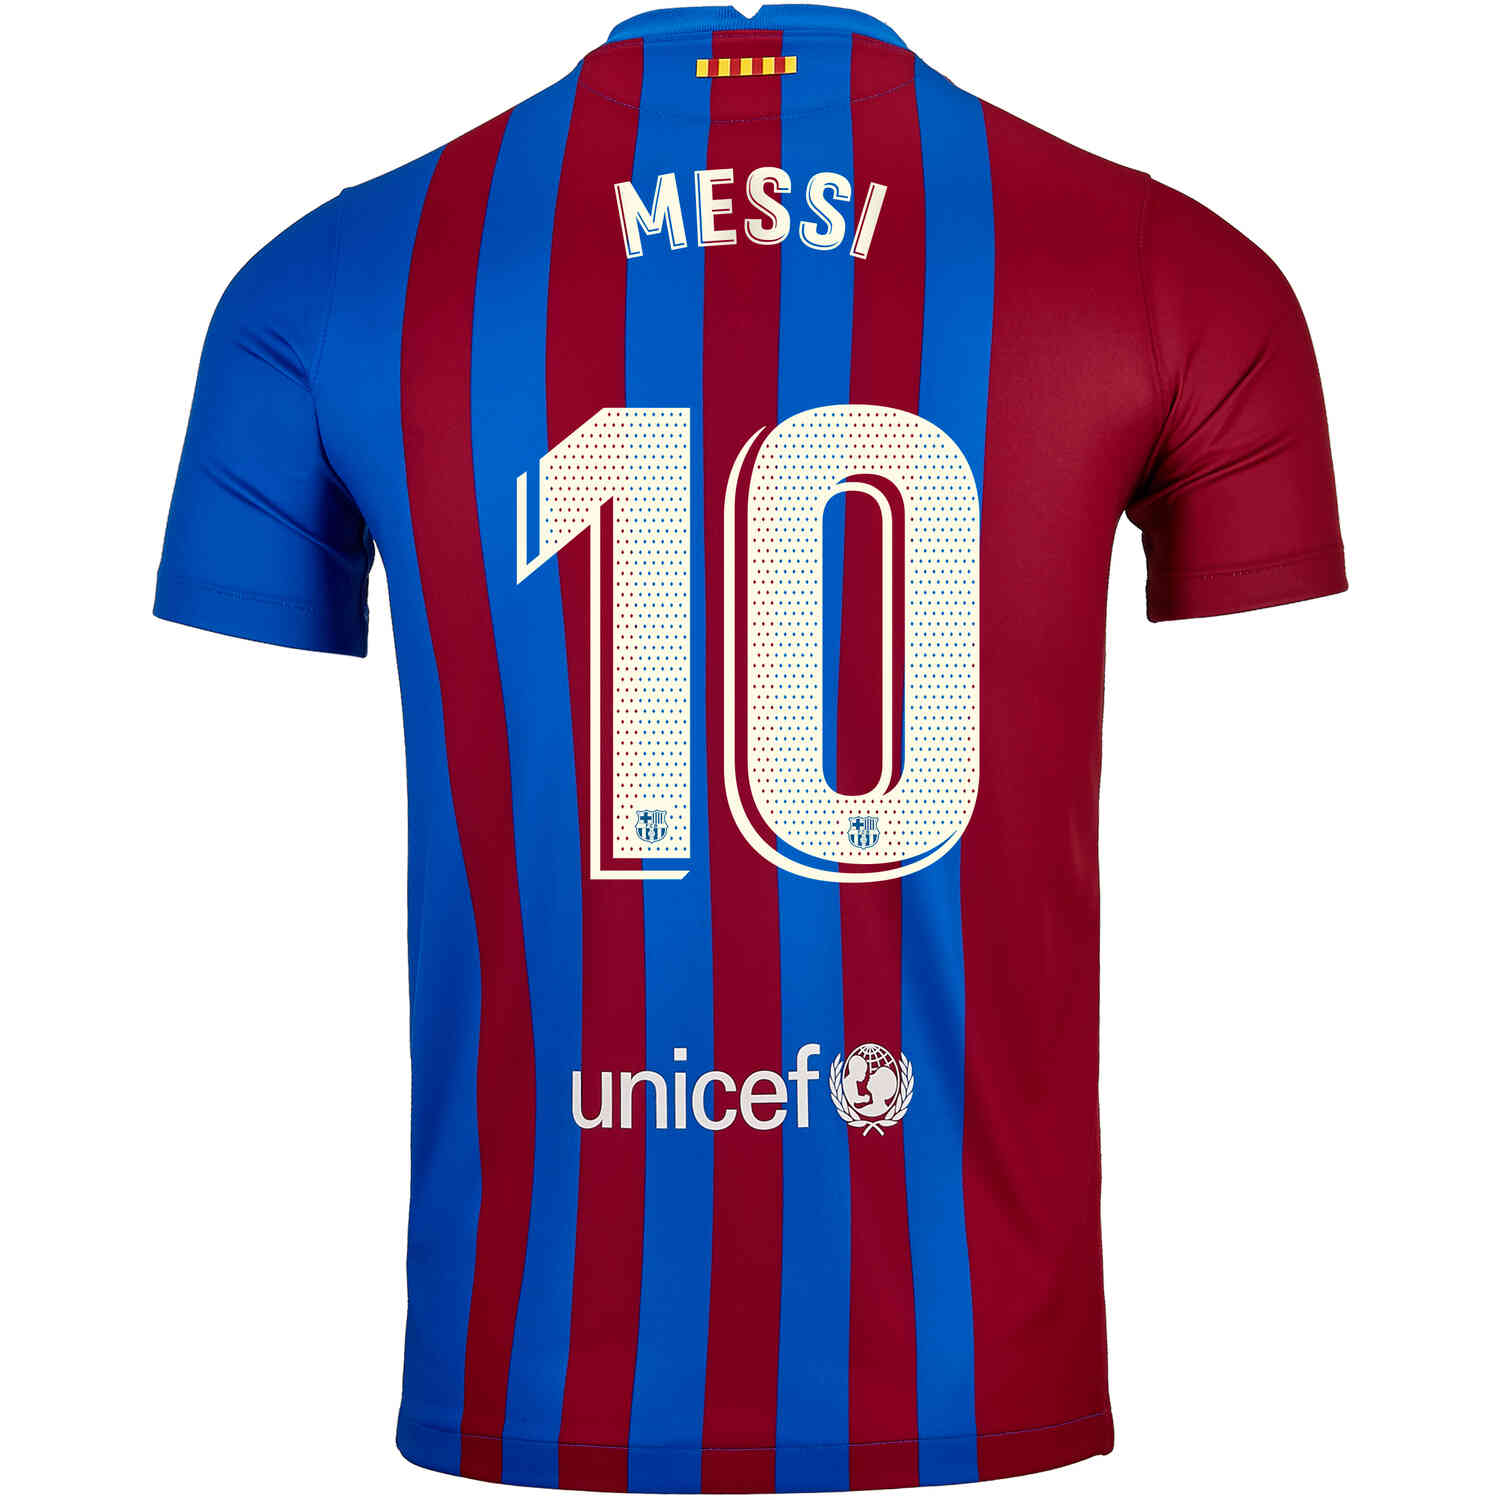 Shop for your Lionel Messi Jersey